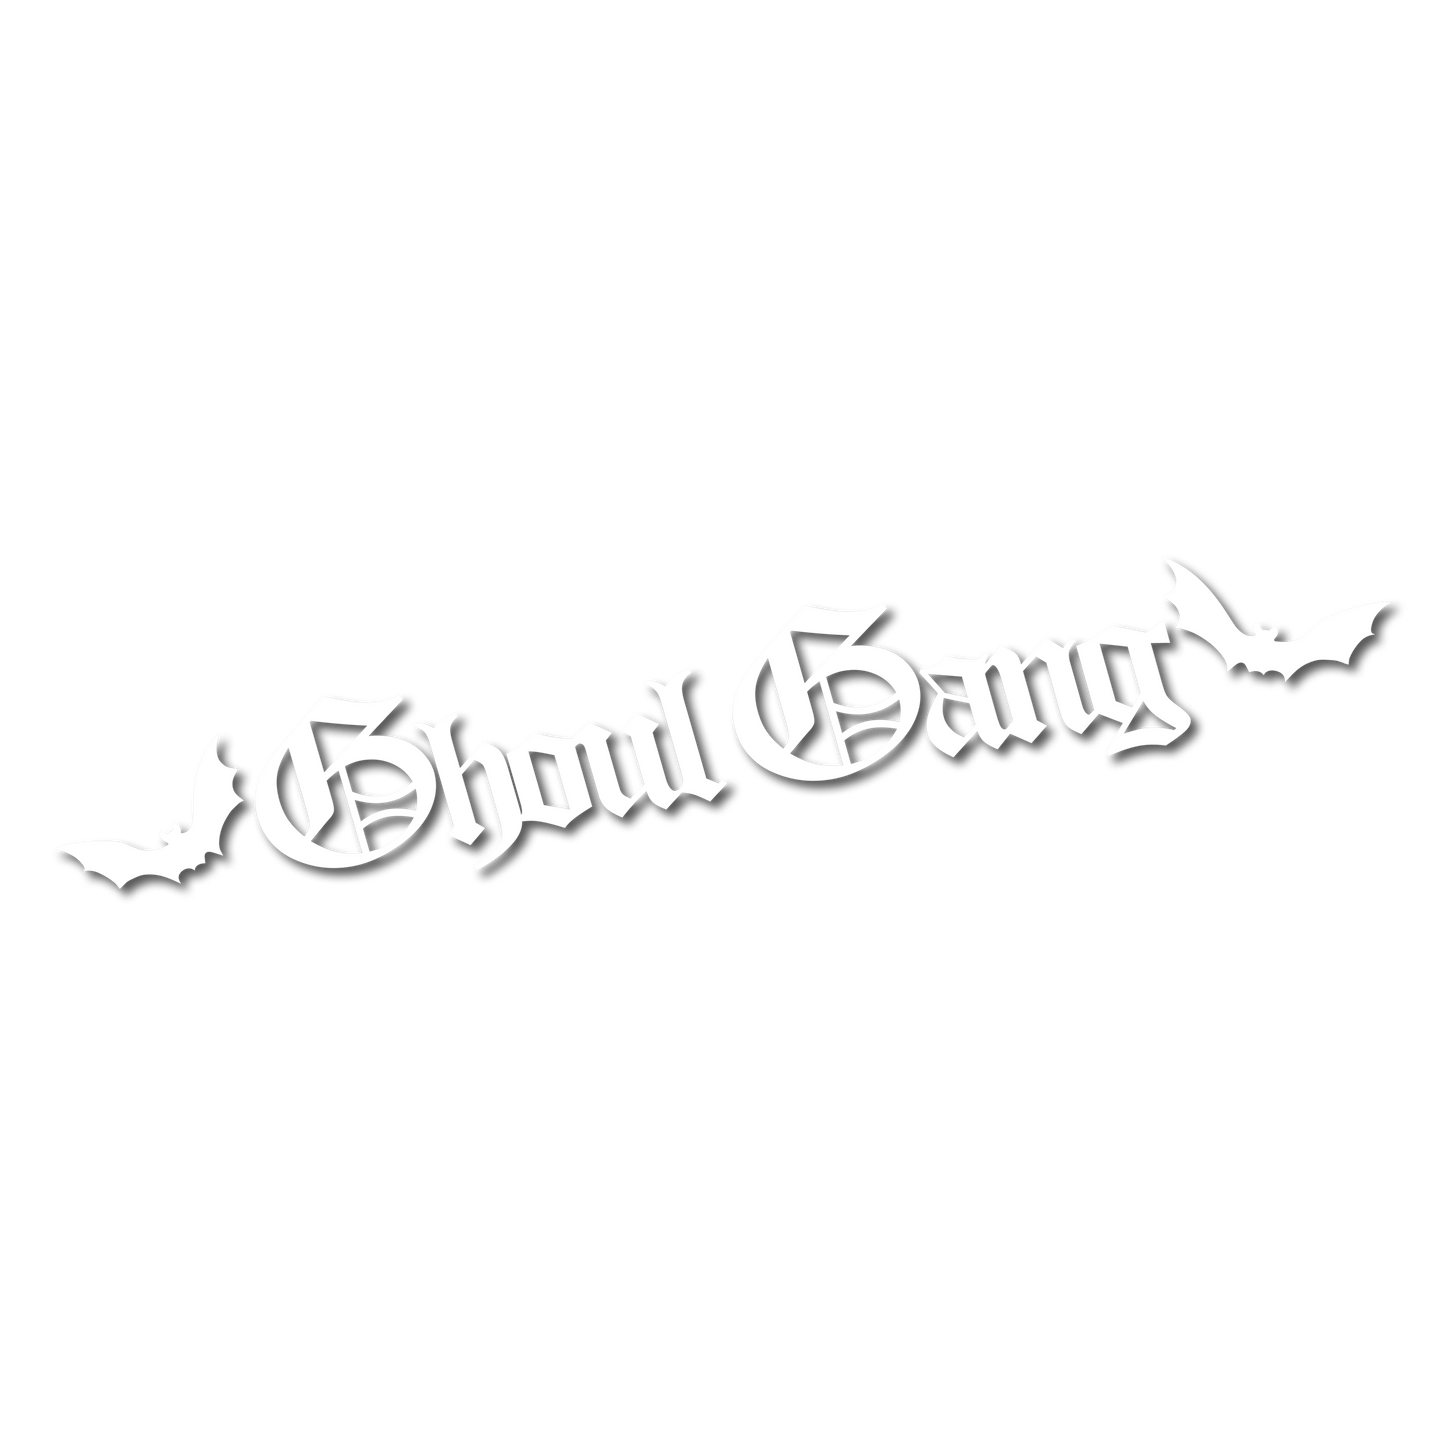 Ghoul Gang Decal - Bright White